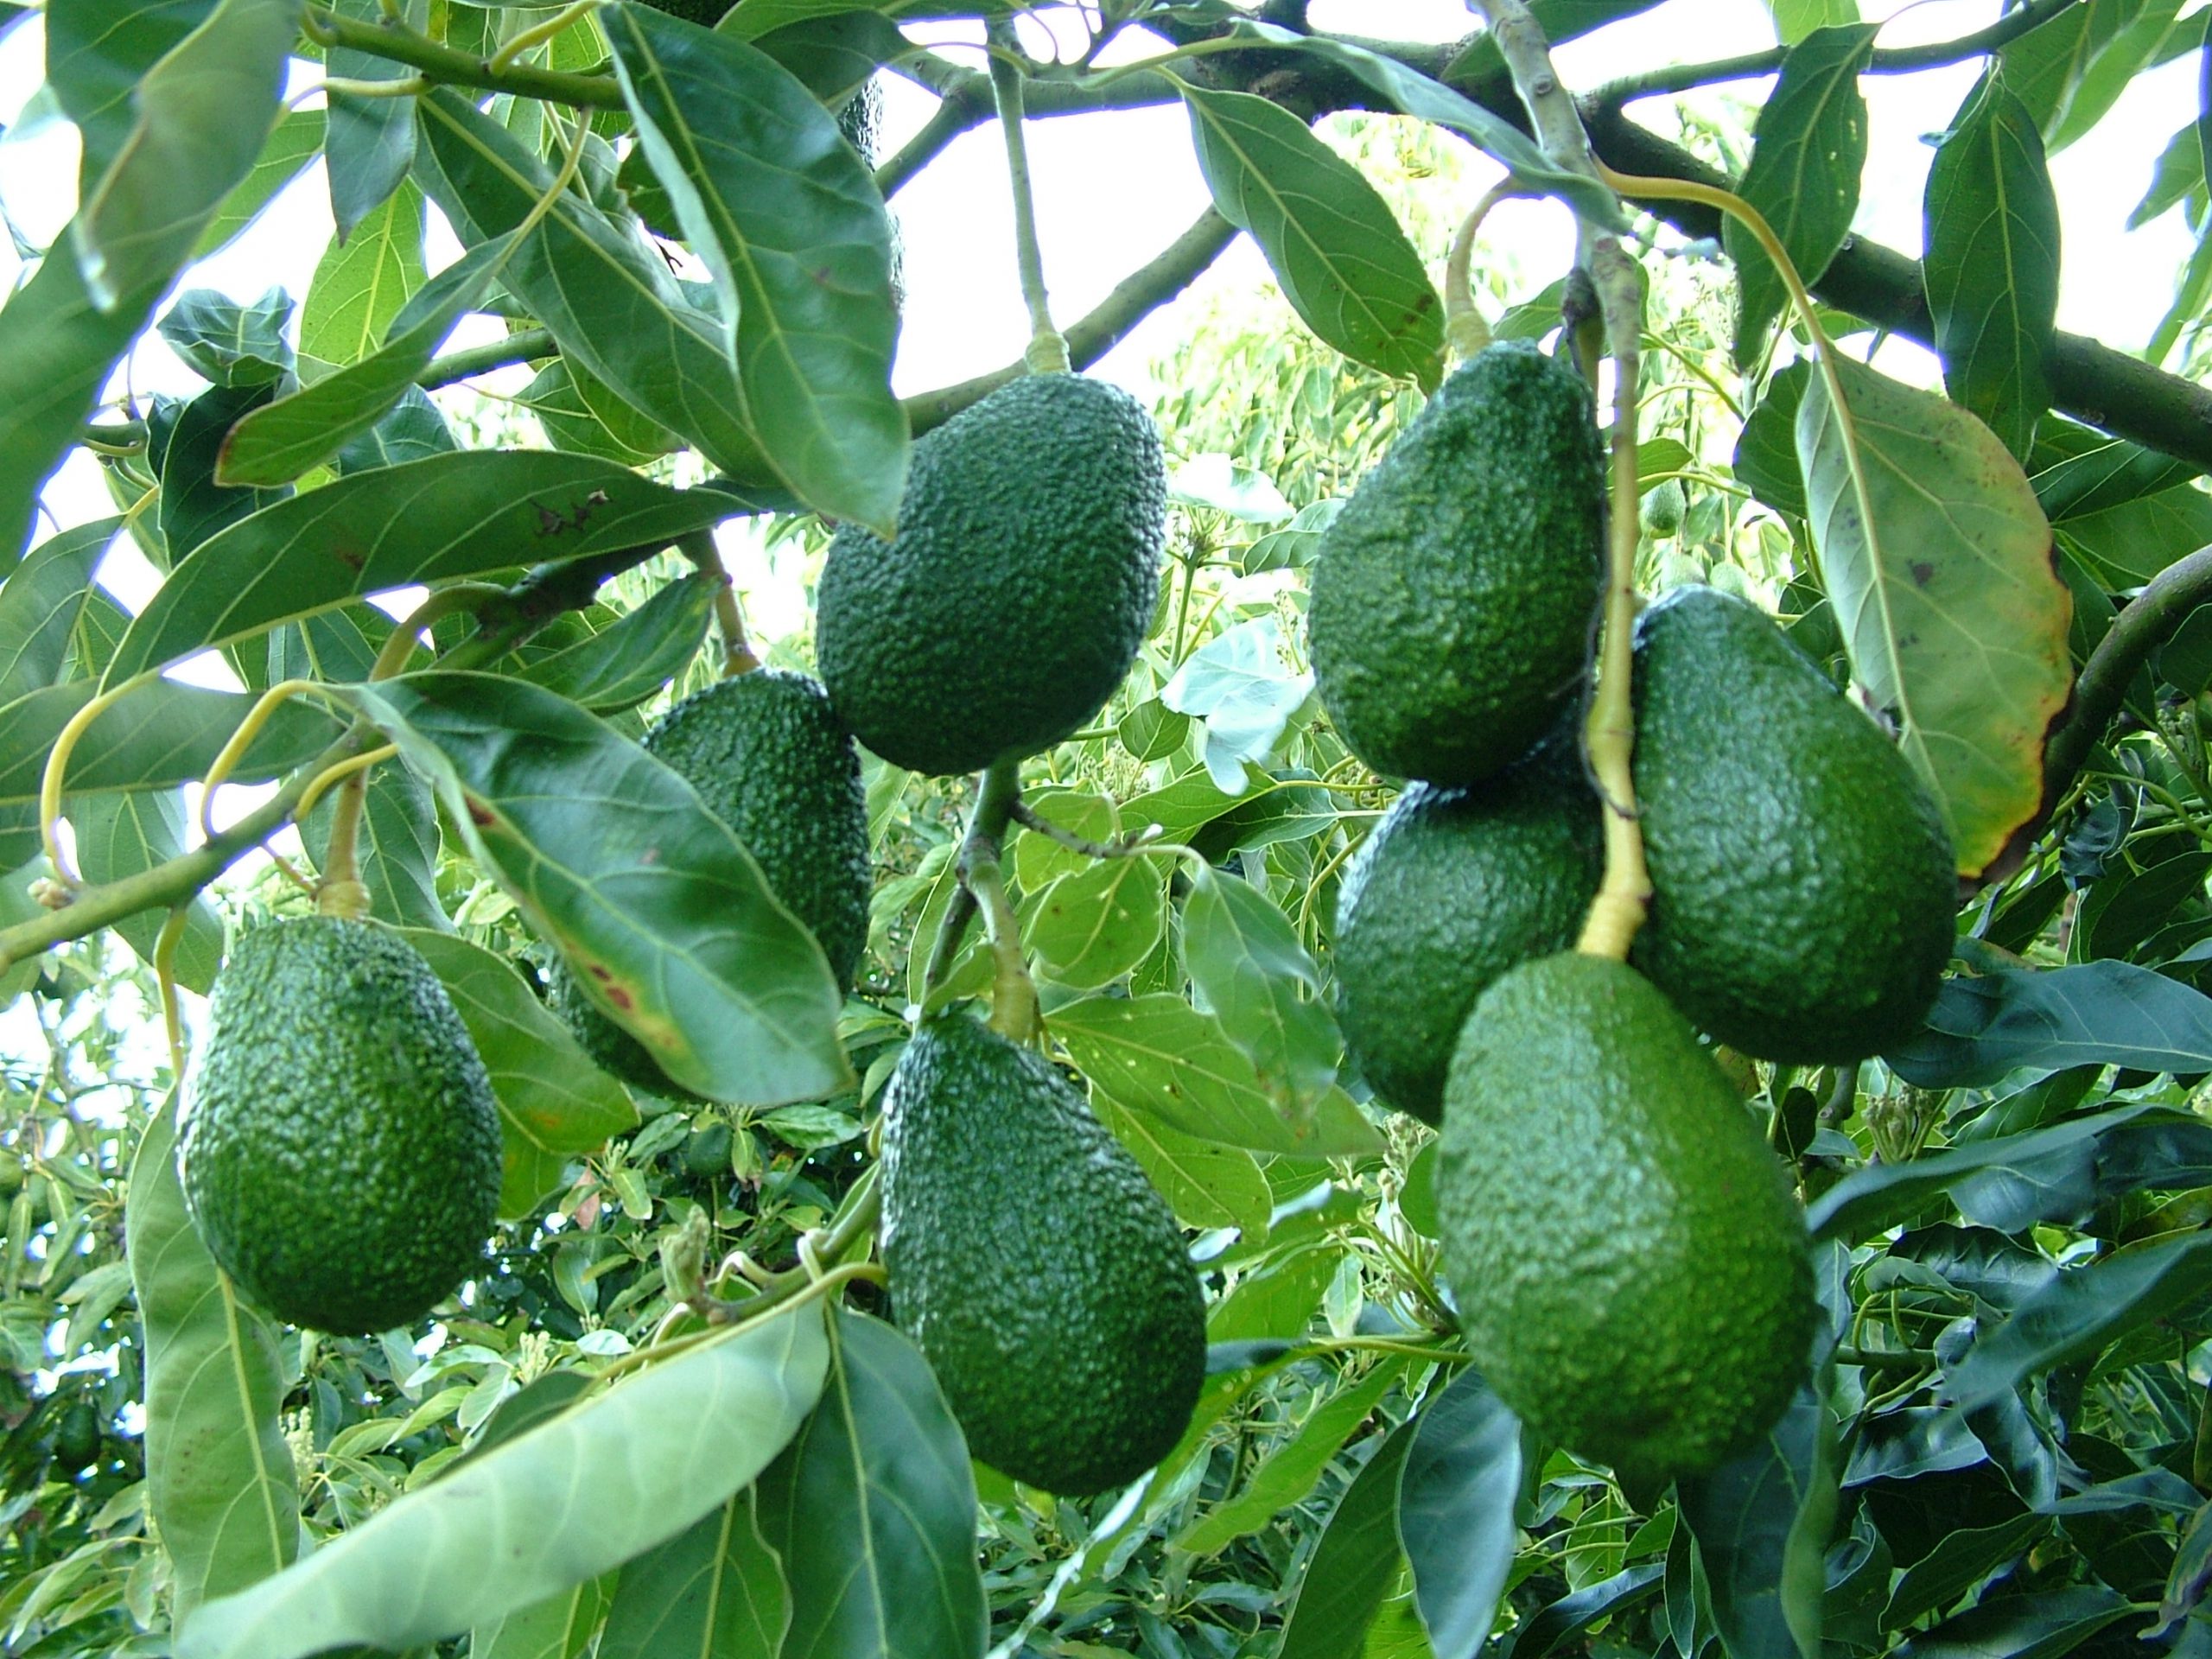 U.S. Halts Avocado Shipments from Mexico Amid Safety Concerns for Inspectors